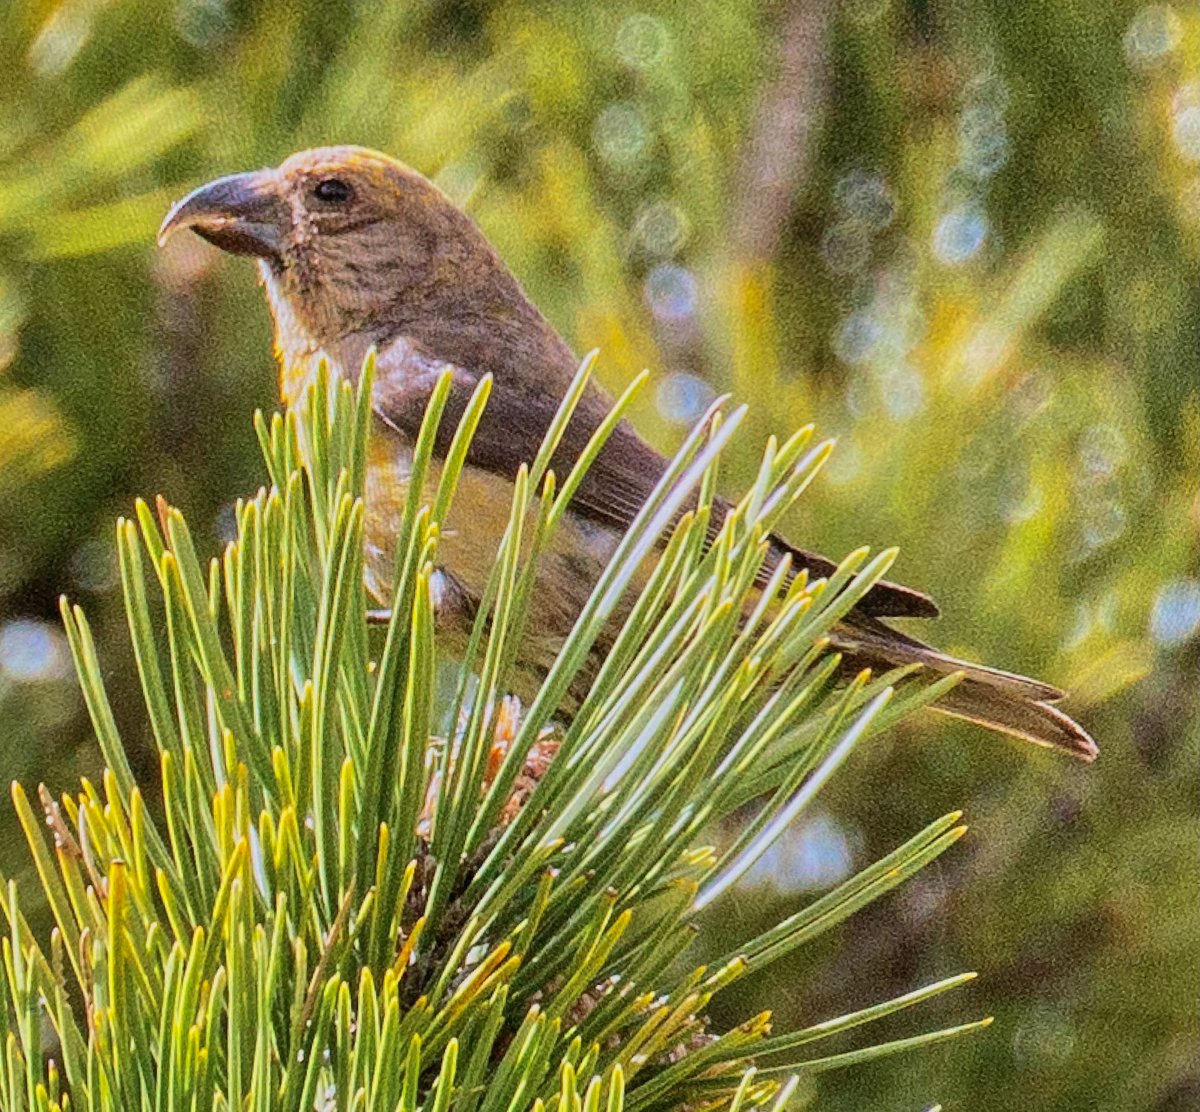 ‘Cyprus’ Crossbill, Troodos, Cyprus. Confusingly, the guillemardi race, often deferred to as Cyprus Crossbill, actually ranges from the Balkans through to Turkey #BirdsSeenIn2023 #cyprusbirds